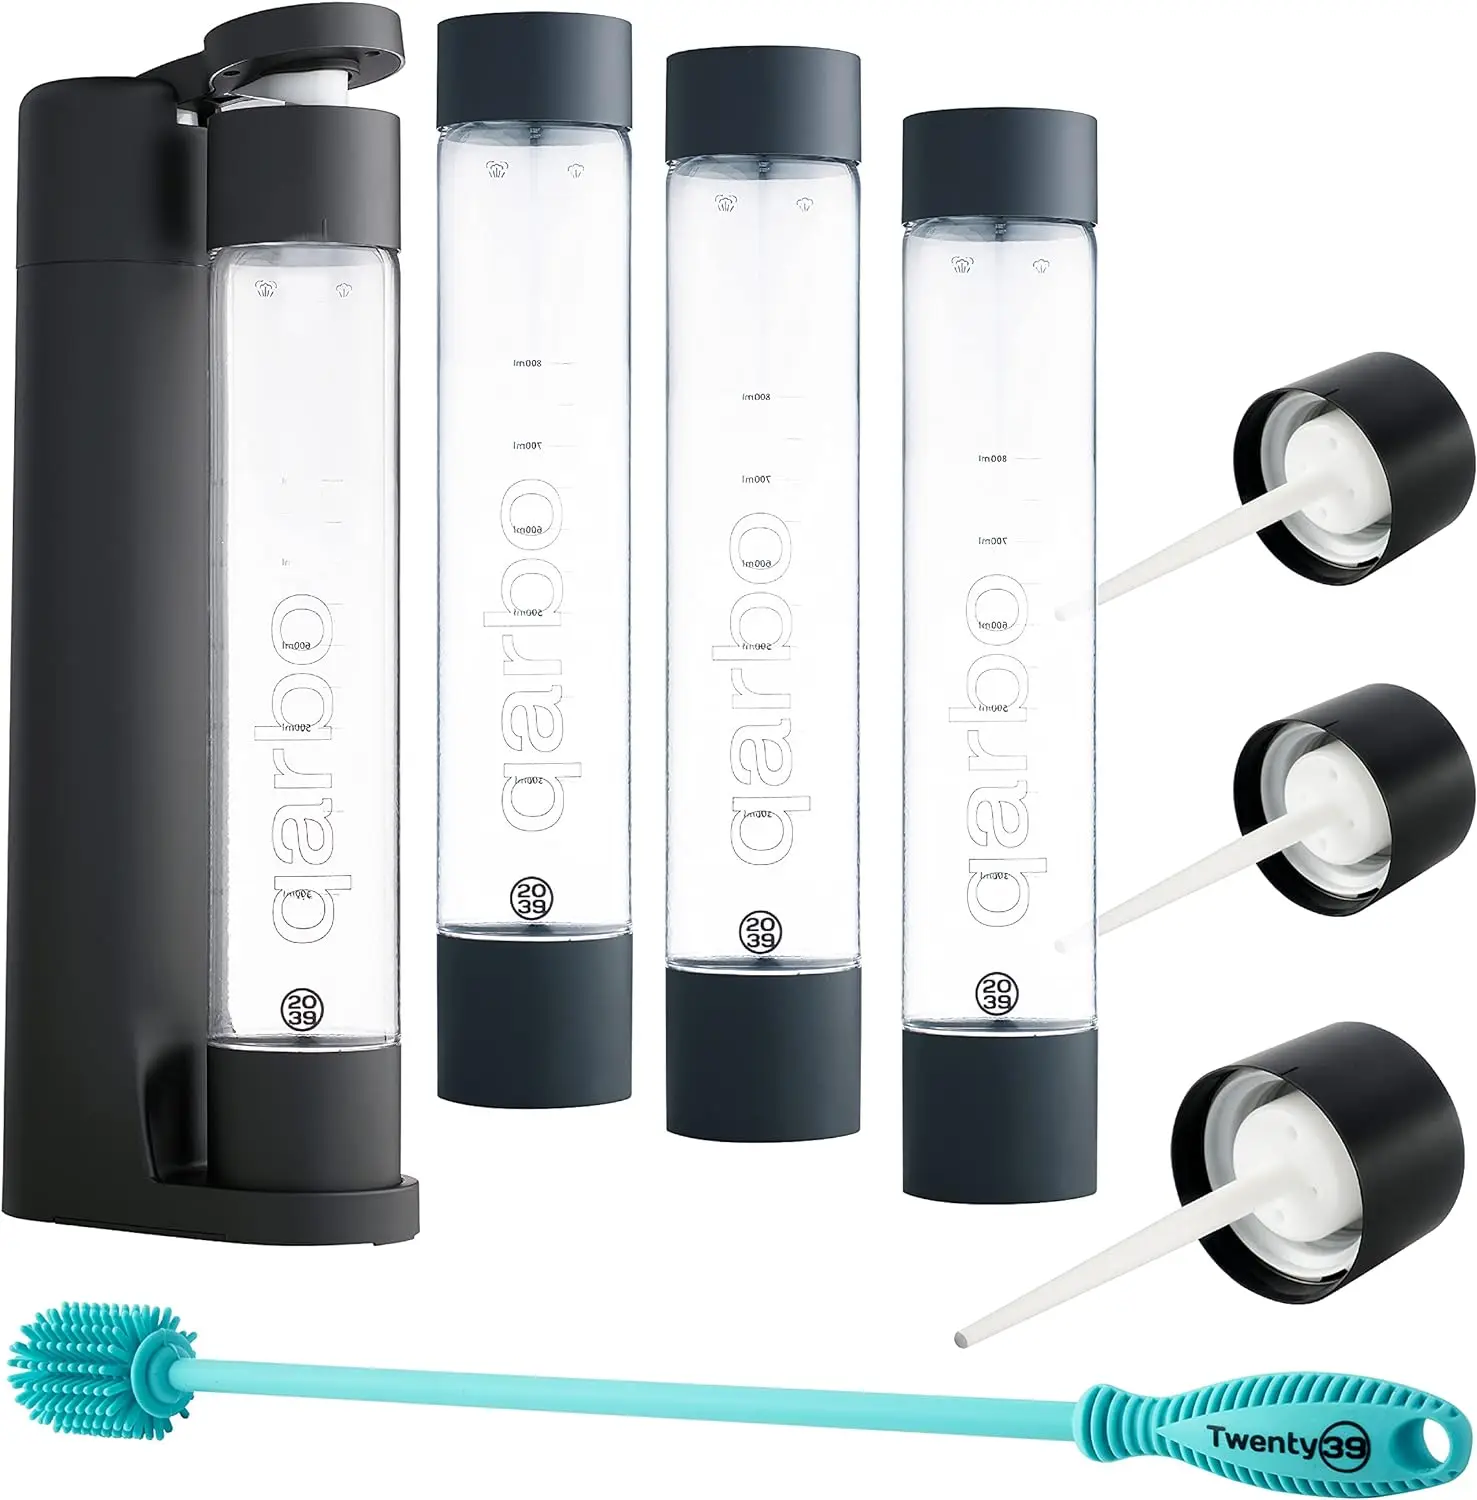 

sparkling water maker Party Plus Bundle with 4 bottles, 3 aircharge caps and cleaning brush (Black) Drnk dispenser Water pump di